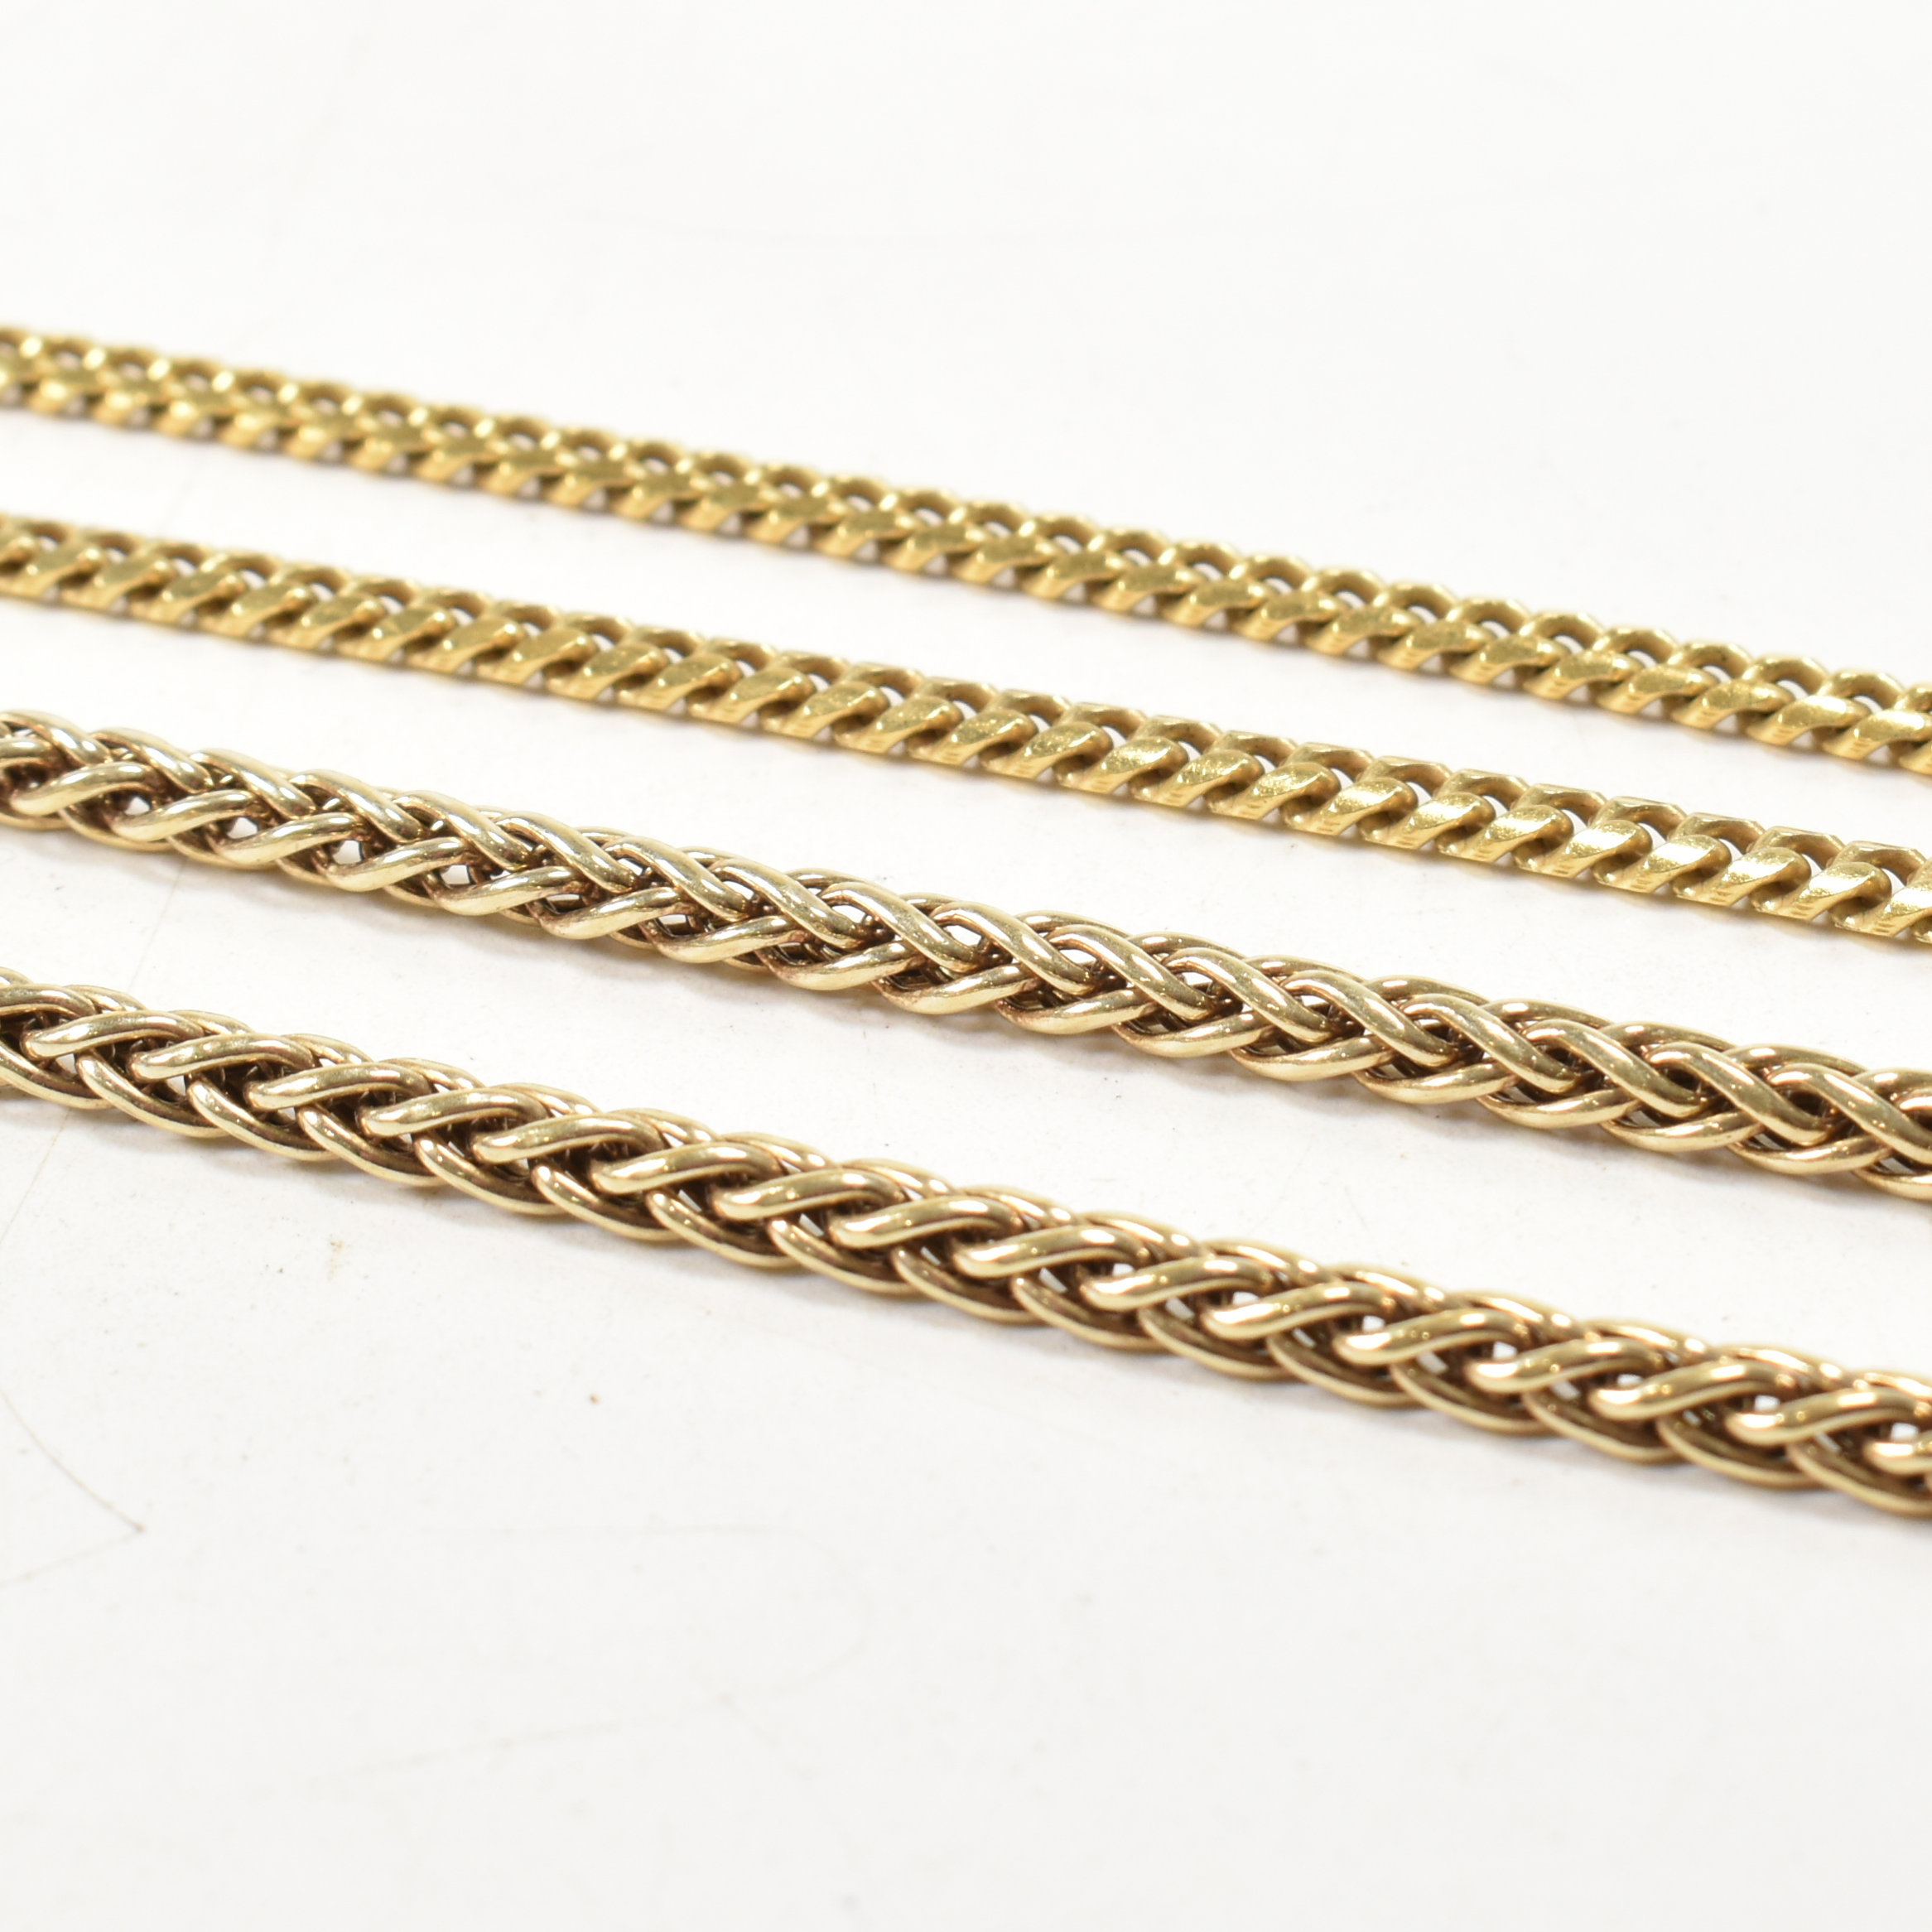 TWO ITALIAN GOLD ON 925 SILVER CHAIN NECKLACES - Image 3 of 4